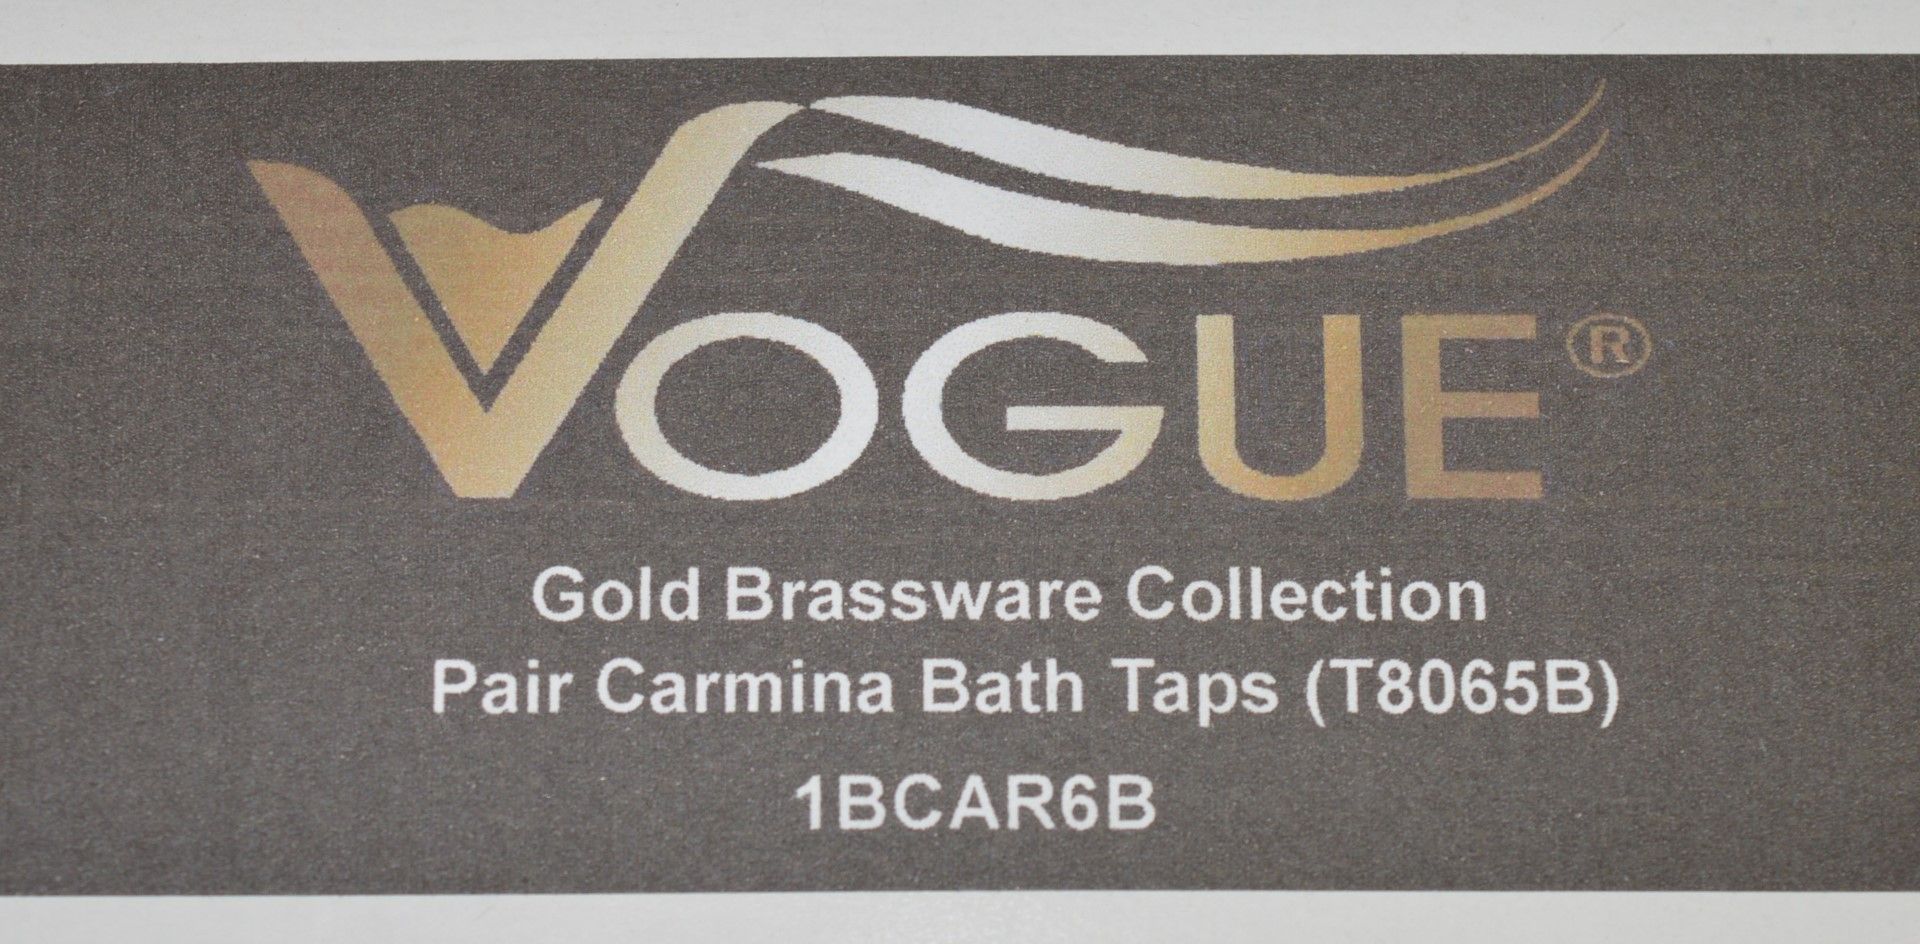 1 x Vogue Carmina Bath Taps - Pair Of - Vogue Bathrooms Gold Brassware Collection - High Quality - Image 2 of 6